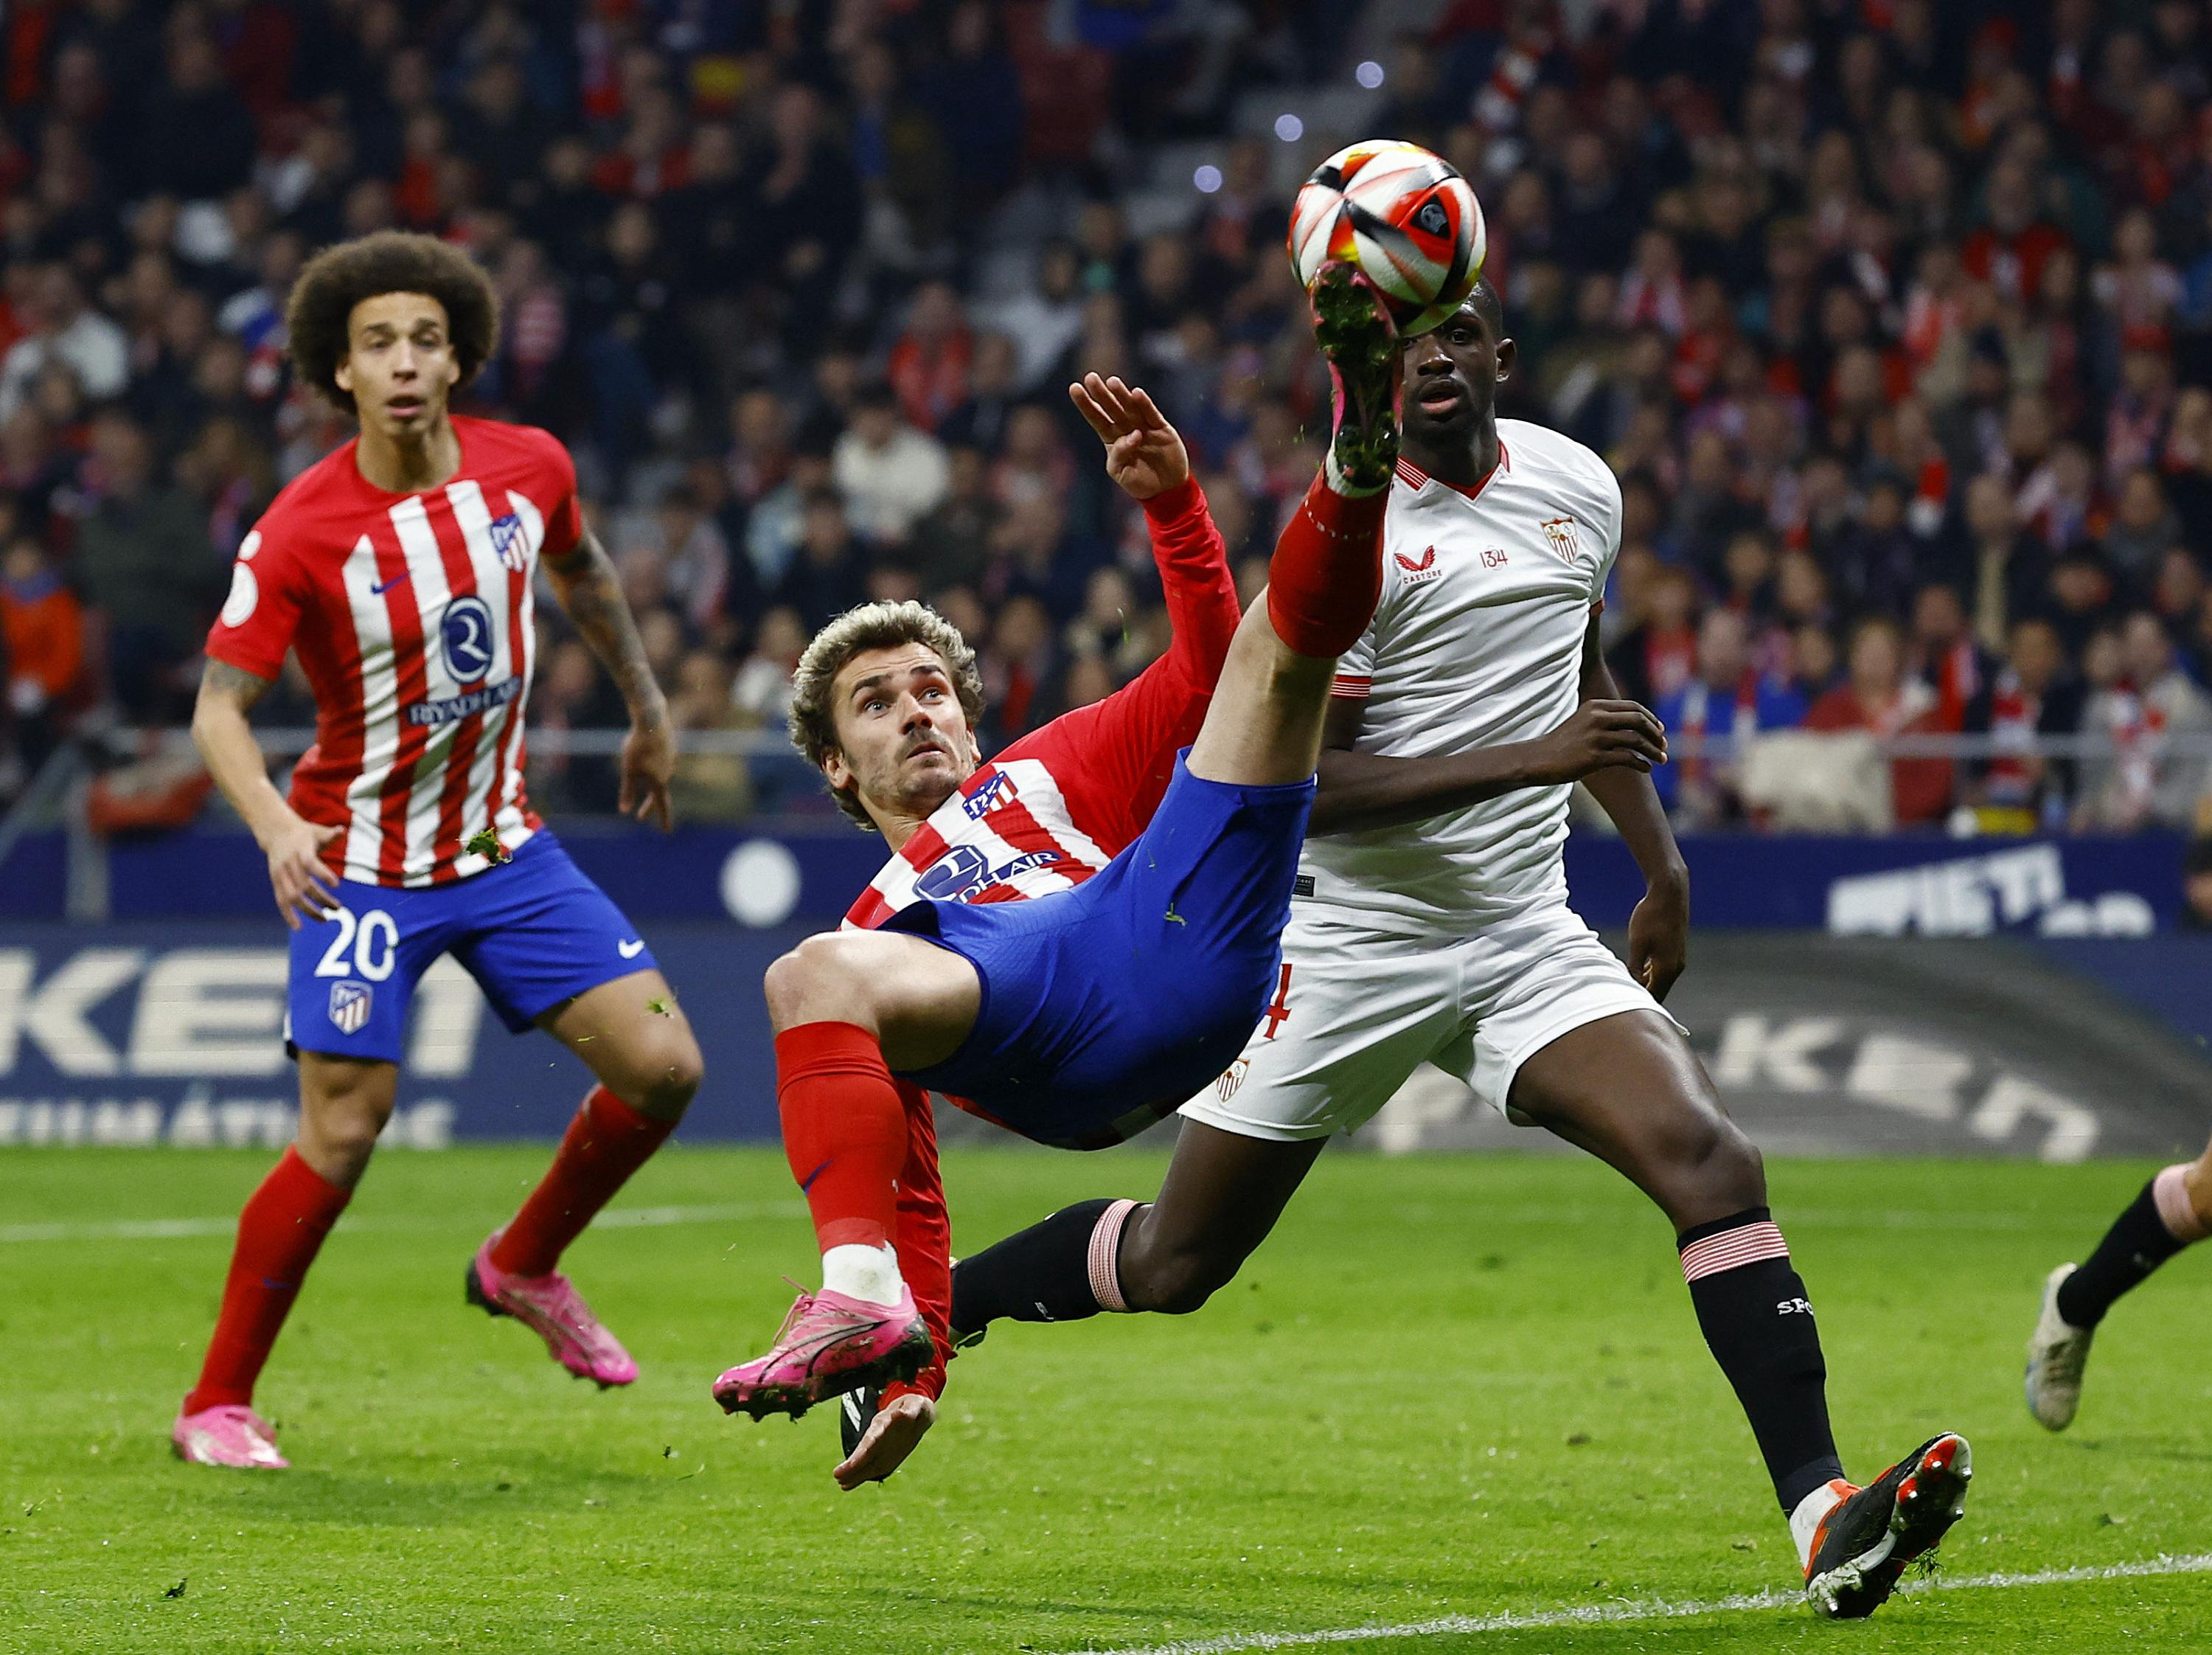 Copa del Rey: Griezmann and Atlético Madrid win against Sevilla and reach the semi-finals